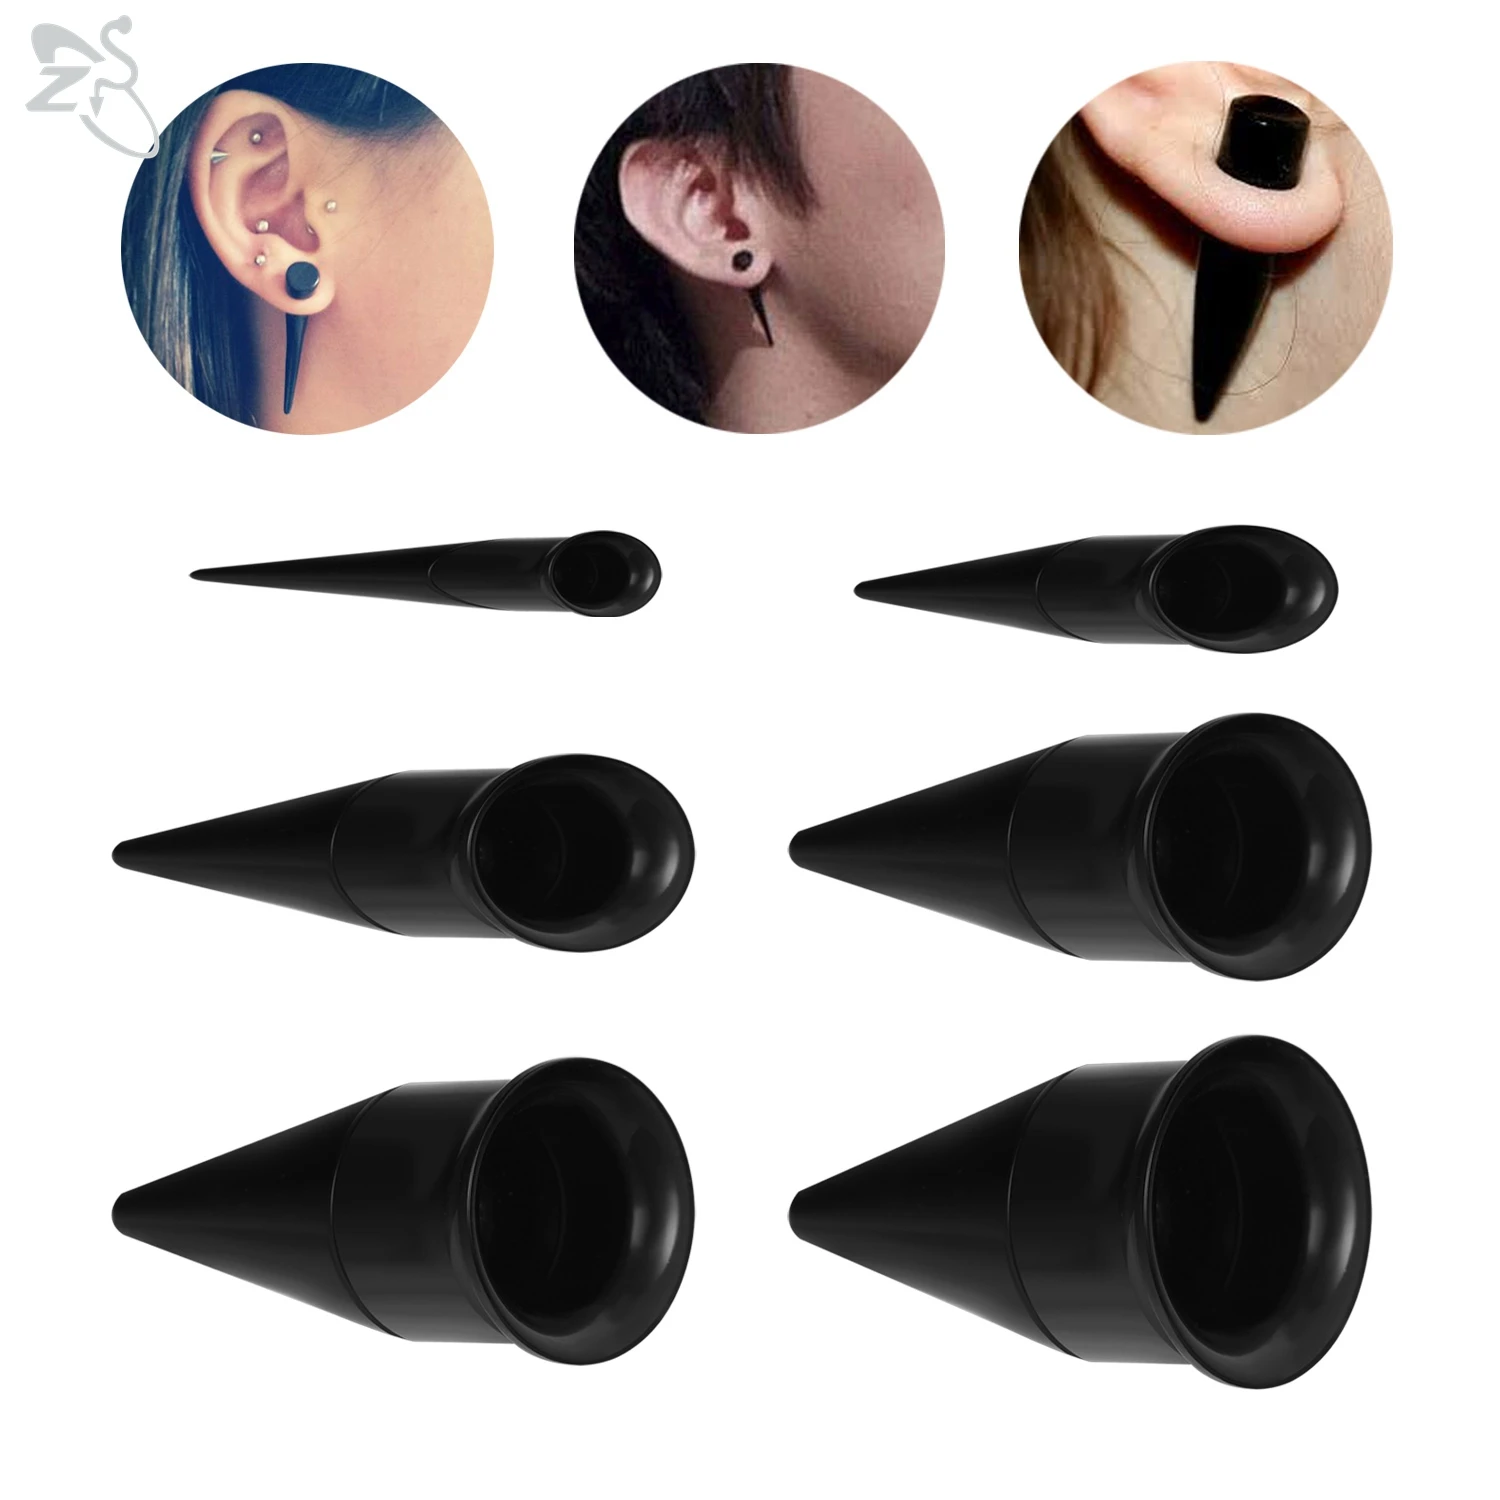 

AOEDEJ 3-16MM 1 Piece Acrylic Ear Plugs and Tunnels Black Color Two-In-One Stretchers Taper Flesh Expanders Ear Gauges Piercing